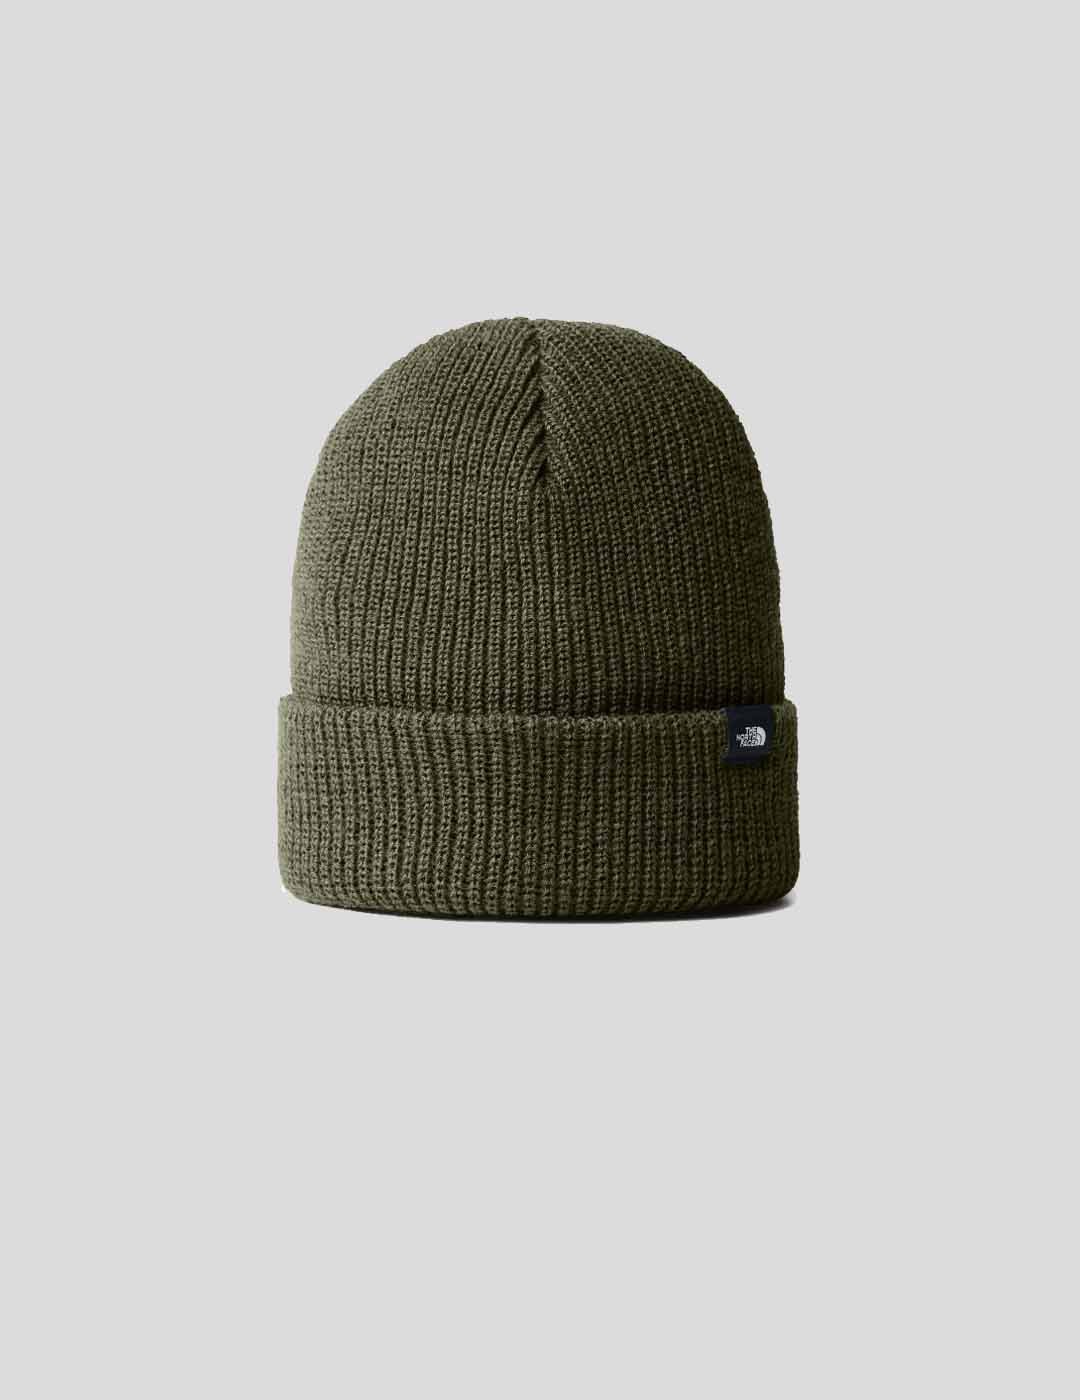 GORRO THE NORTH FACE TNF FREEBEENIE HAT MILITARY OLIVE